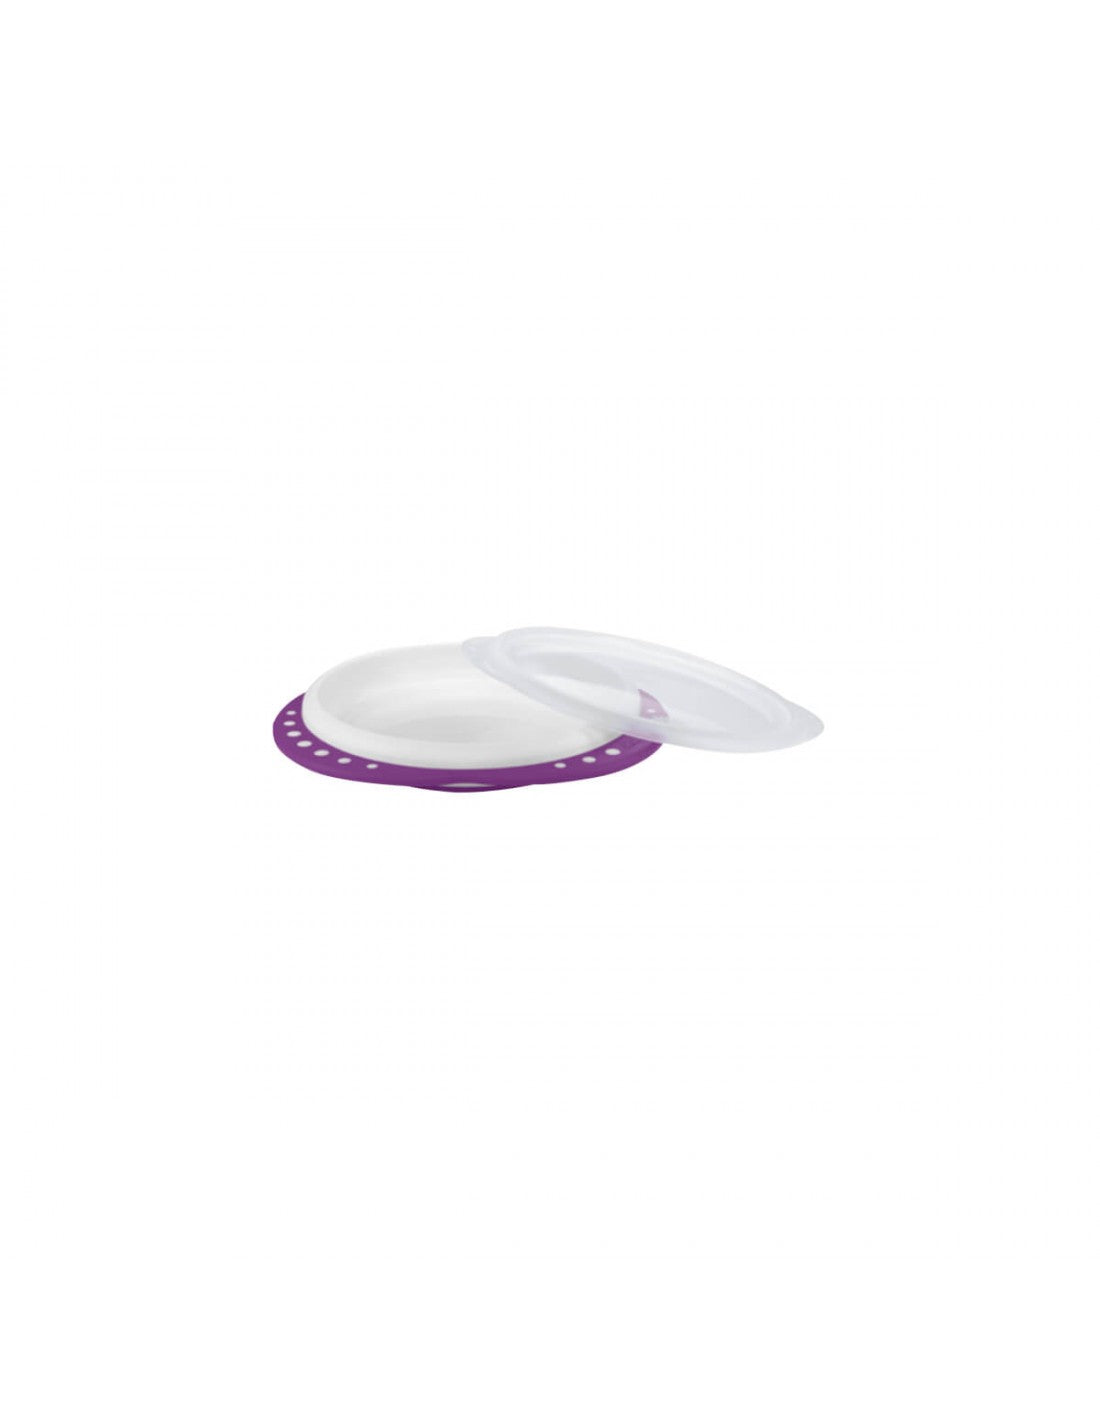 Nuk Easylearner'S Plate With Lid Non-Slip Handles - (Any One) (7044)